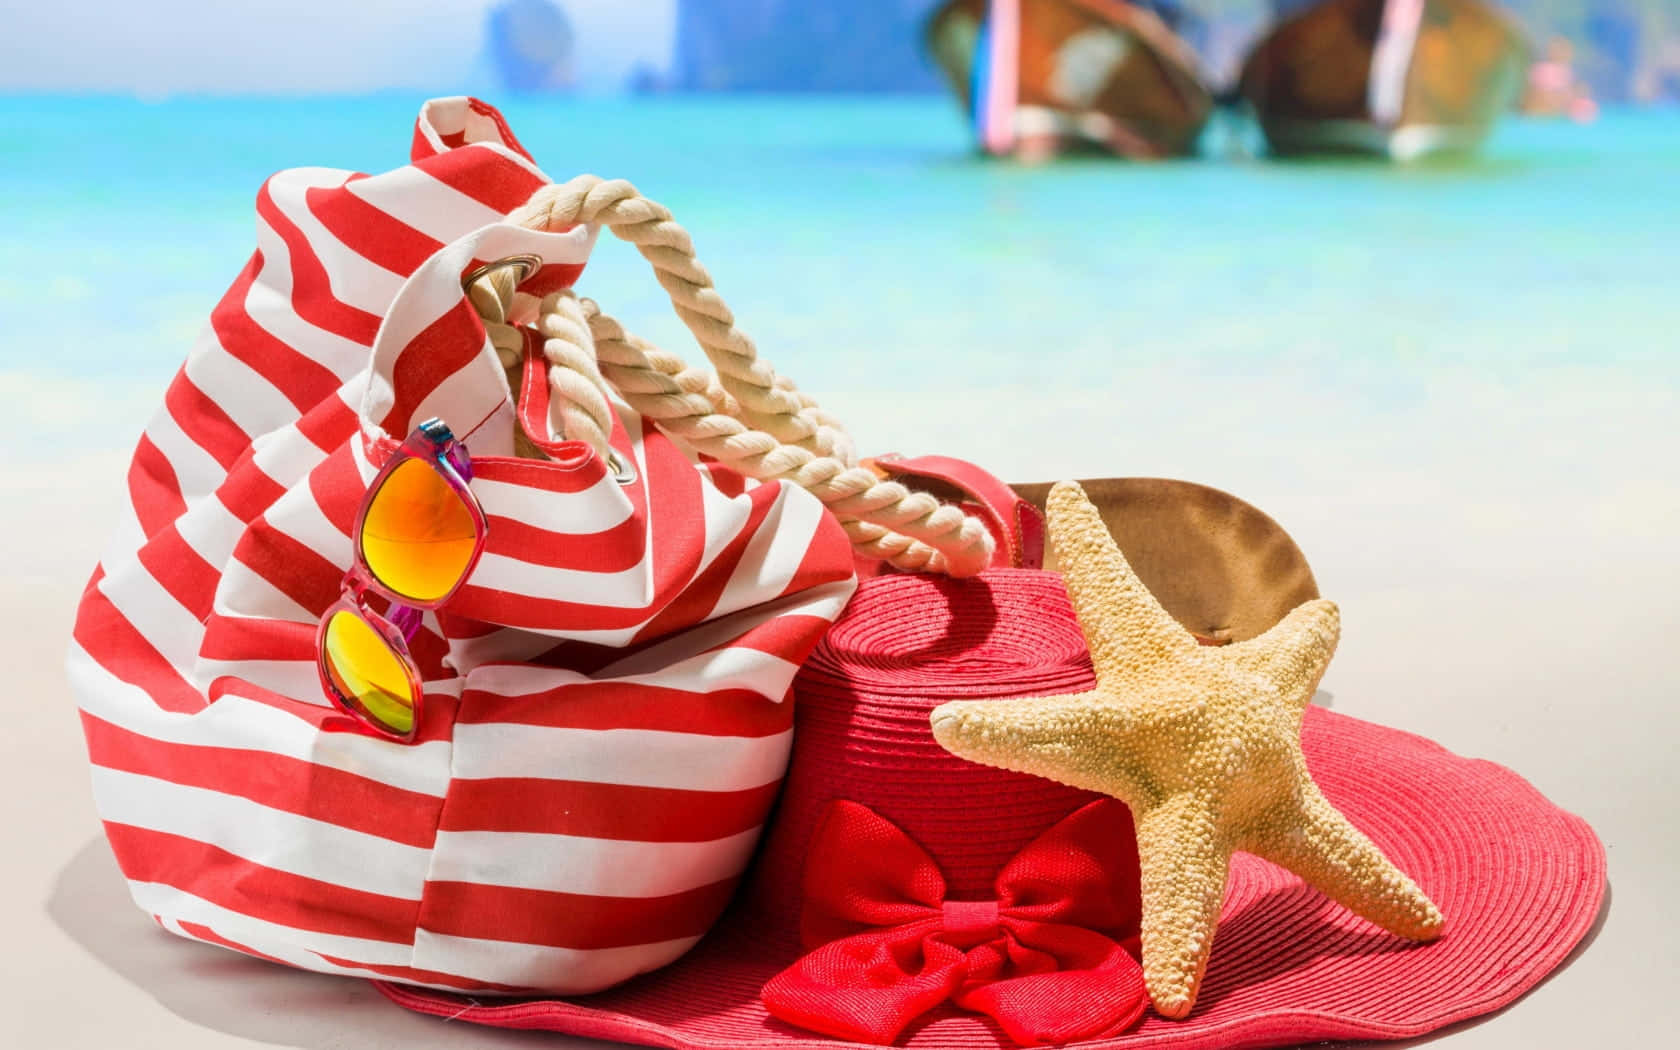 Vibrant and Colorful Beach Bag with Summer Essentials Wallpaper